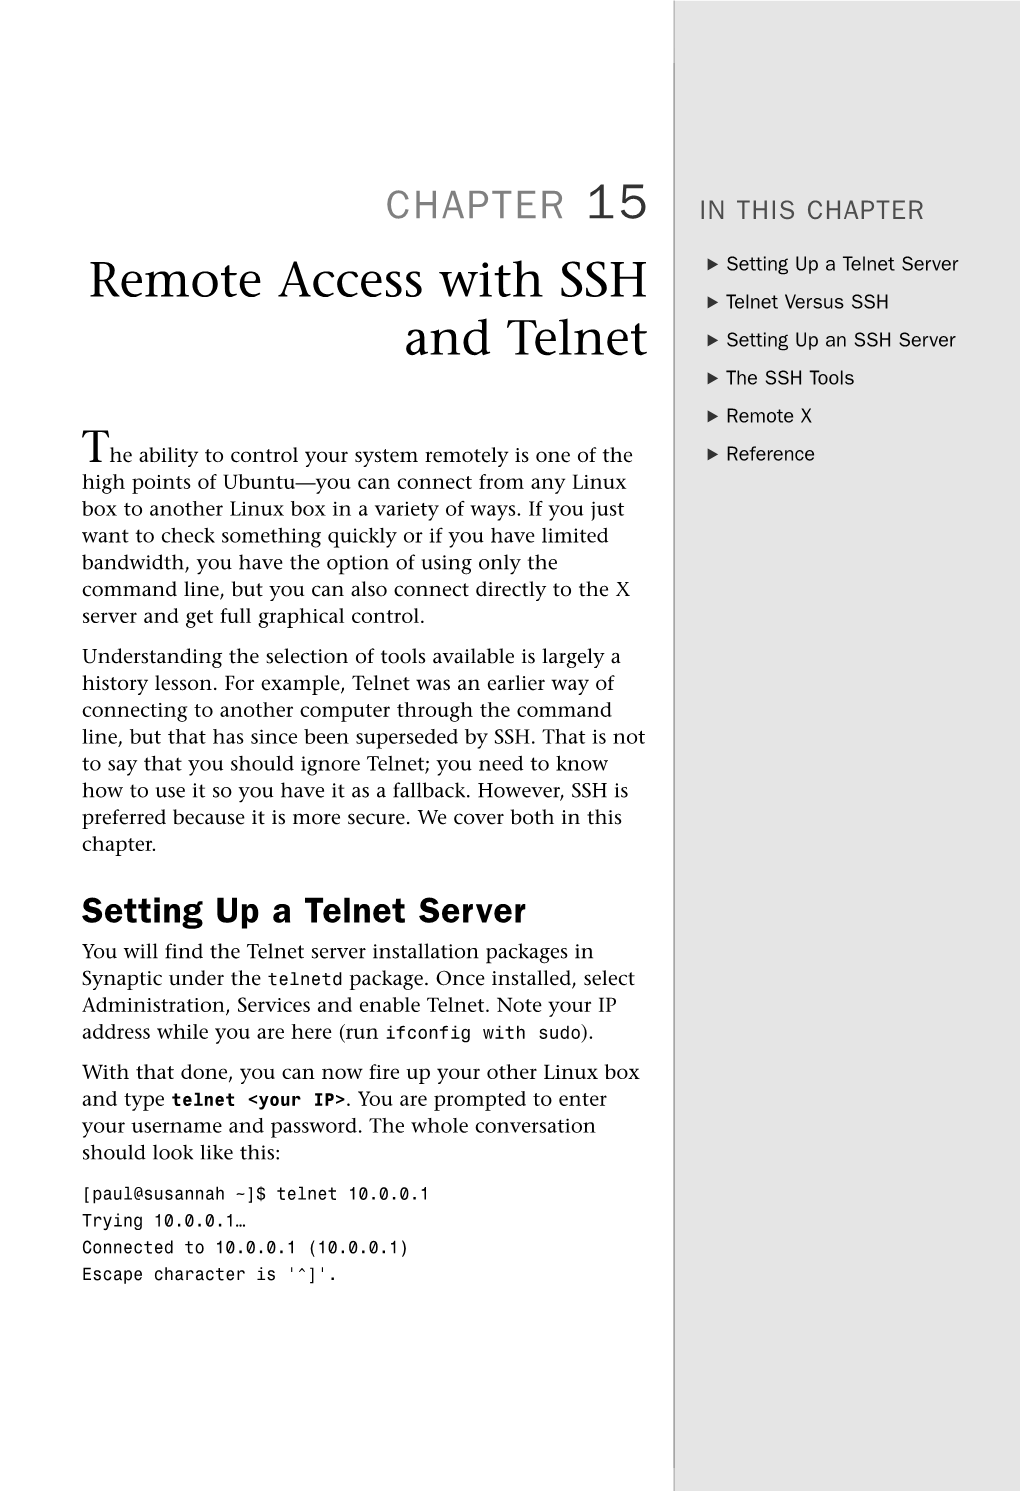 Remote Access with SSH and Telnet